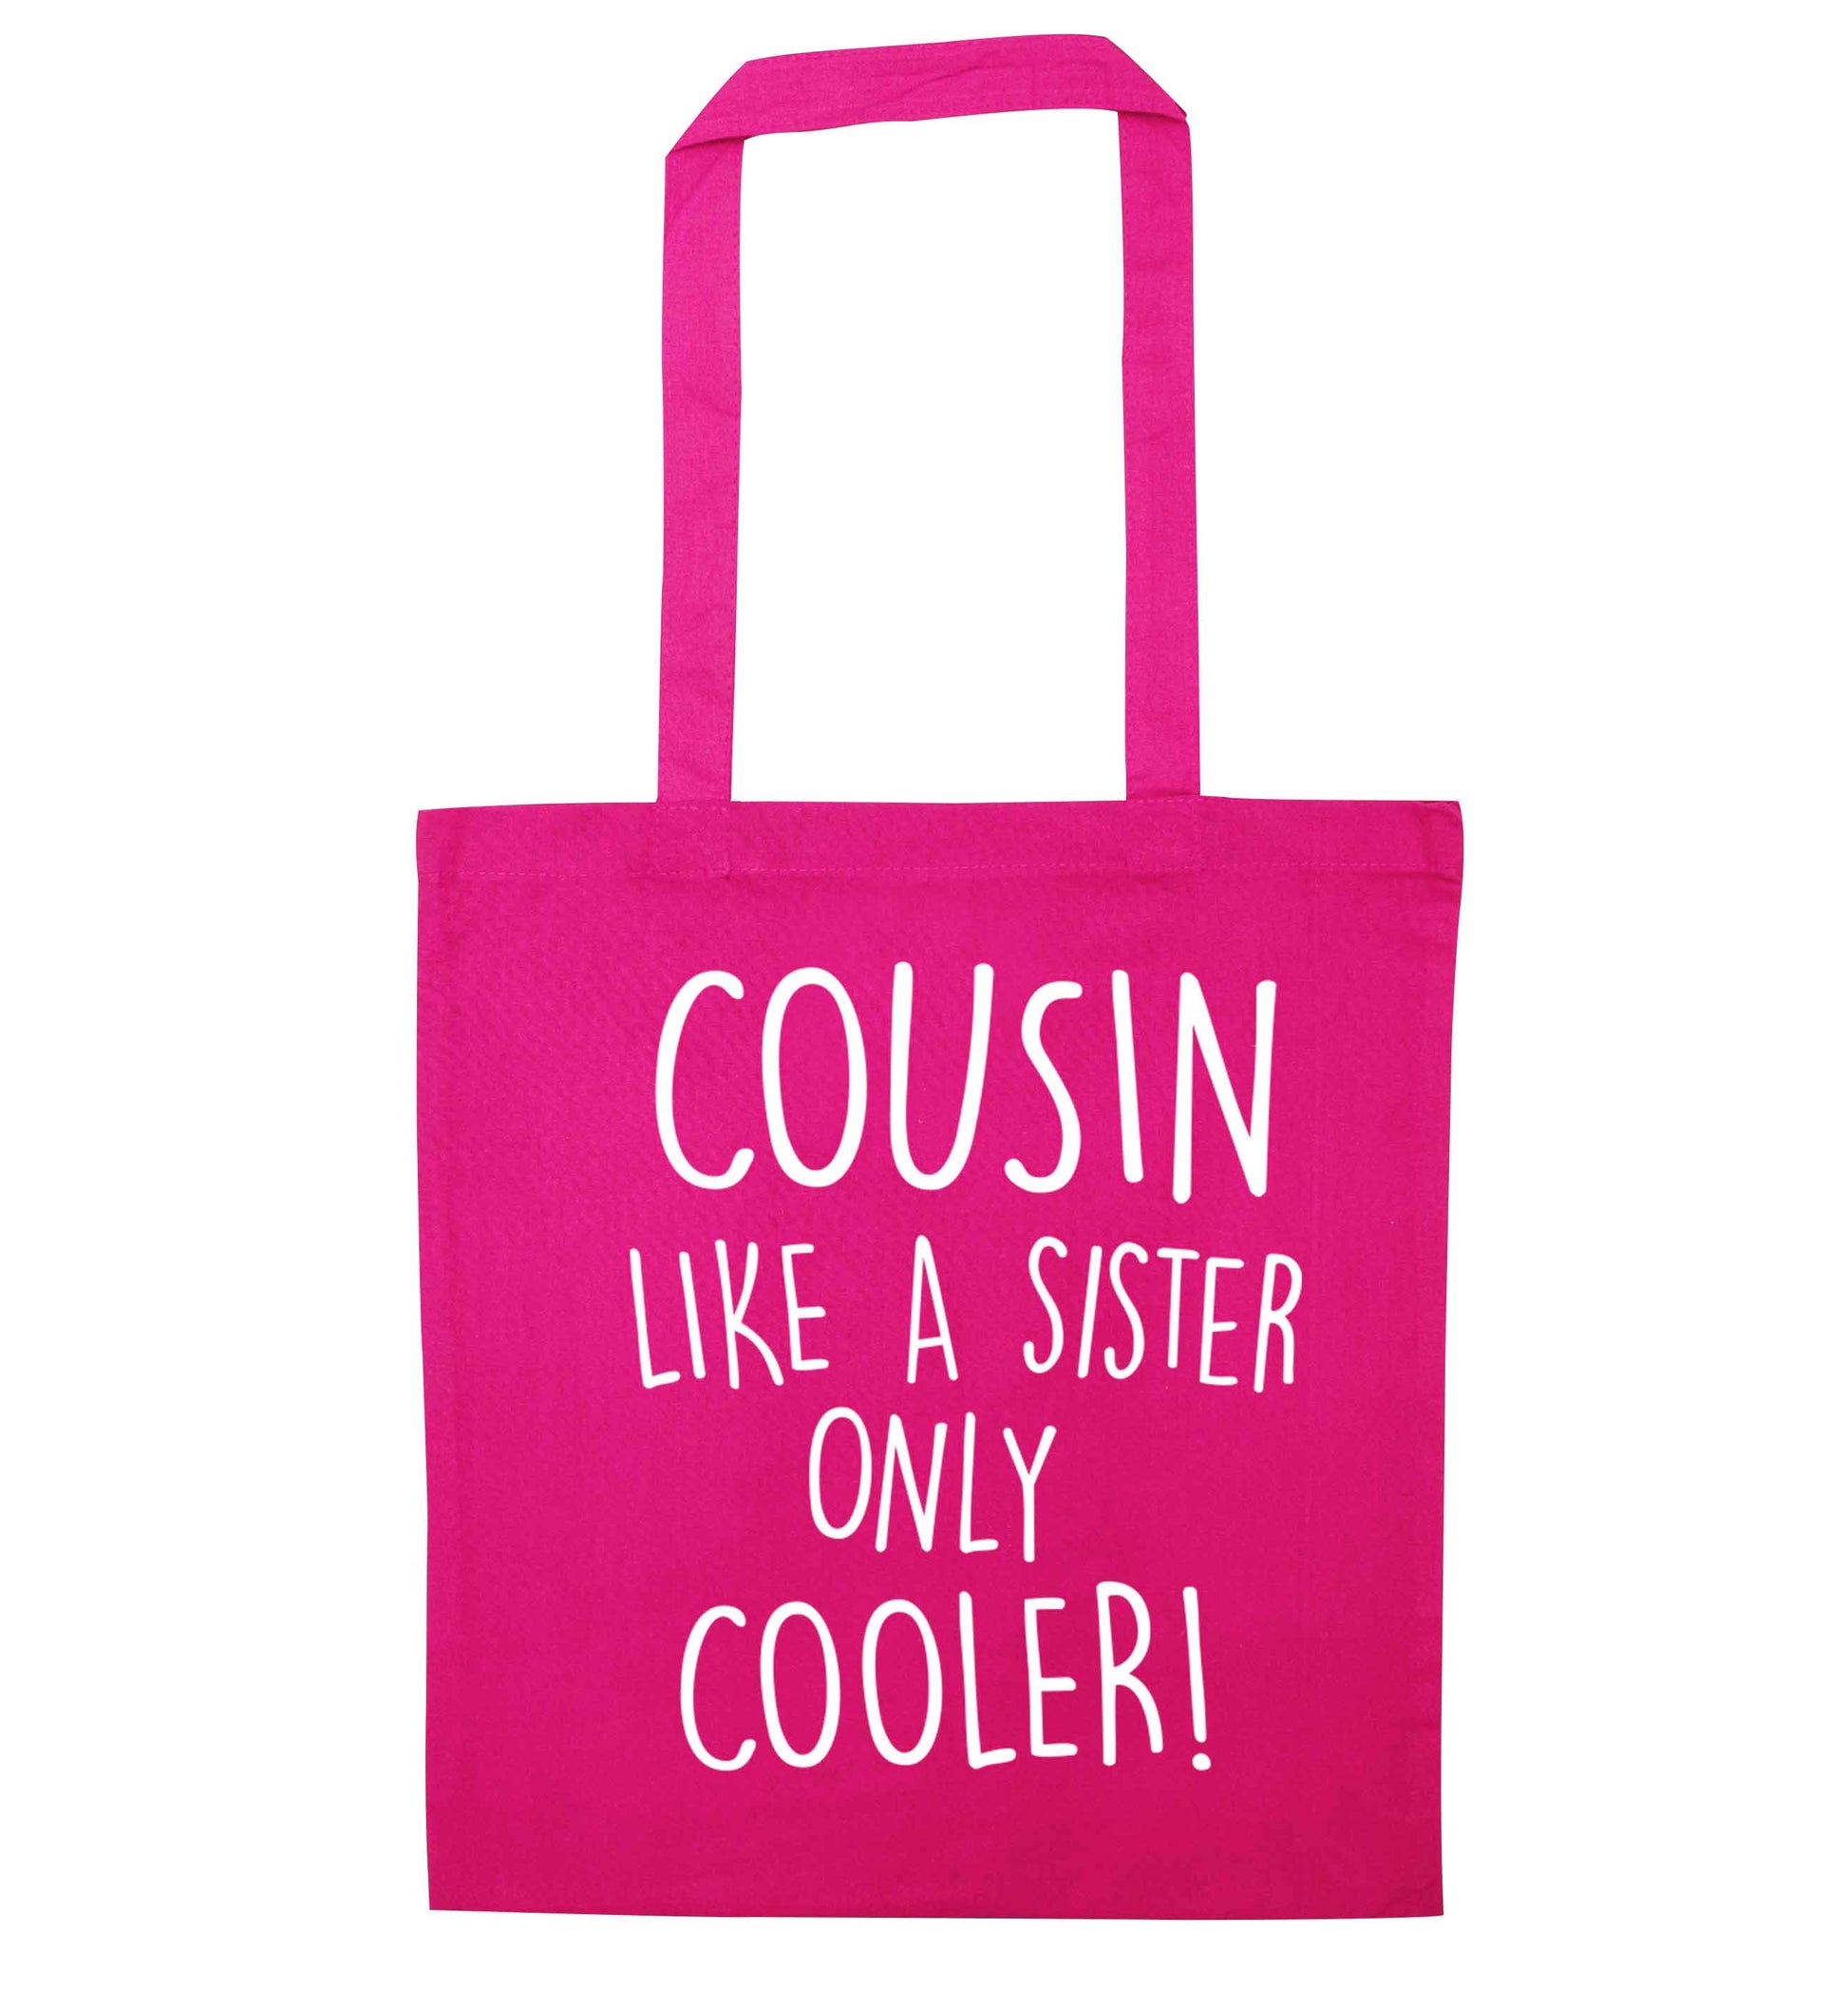 Cousin like a sister only cooler pink tote bag